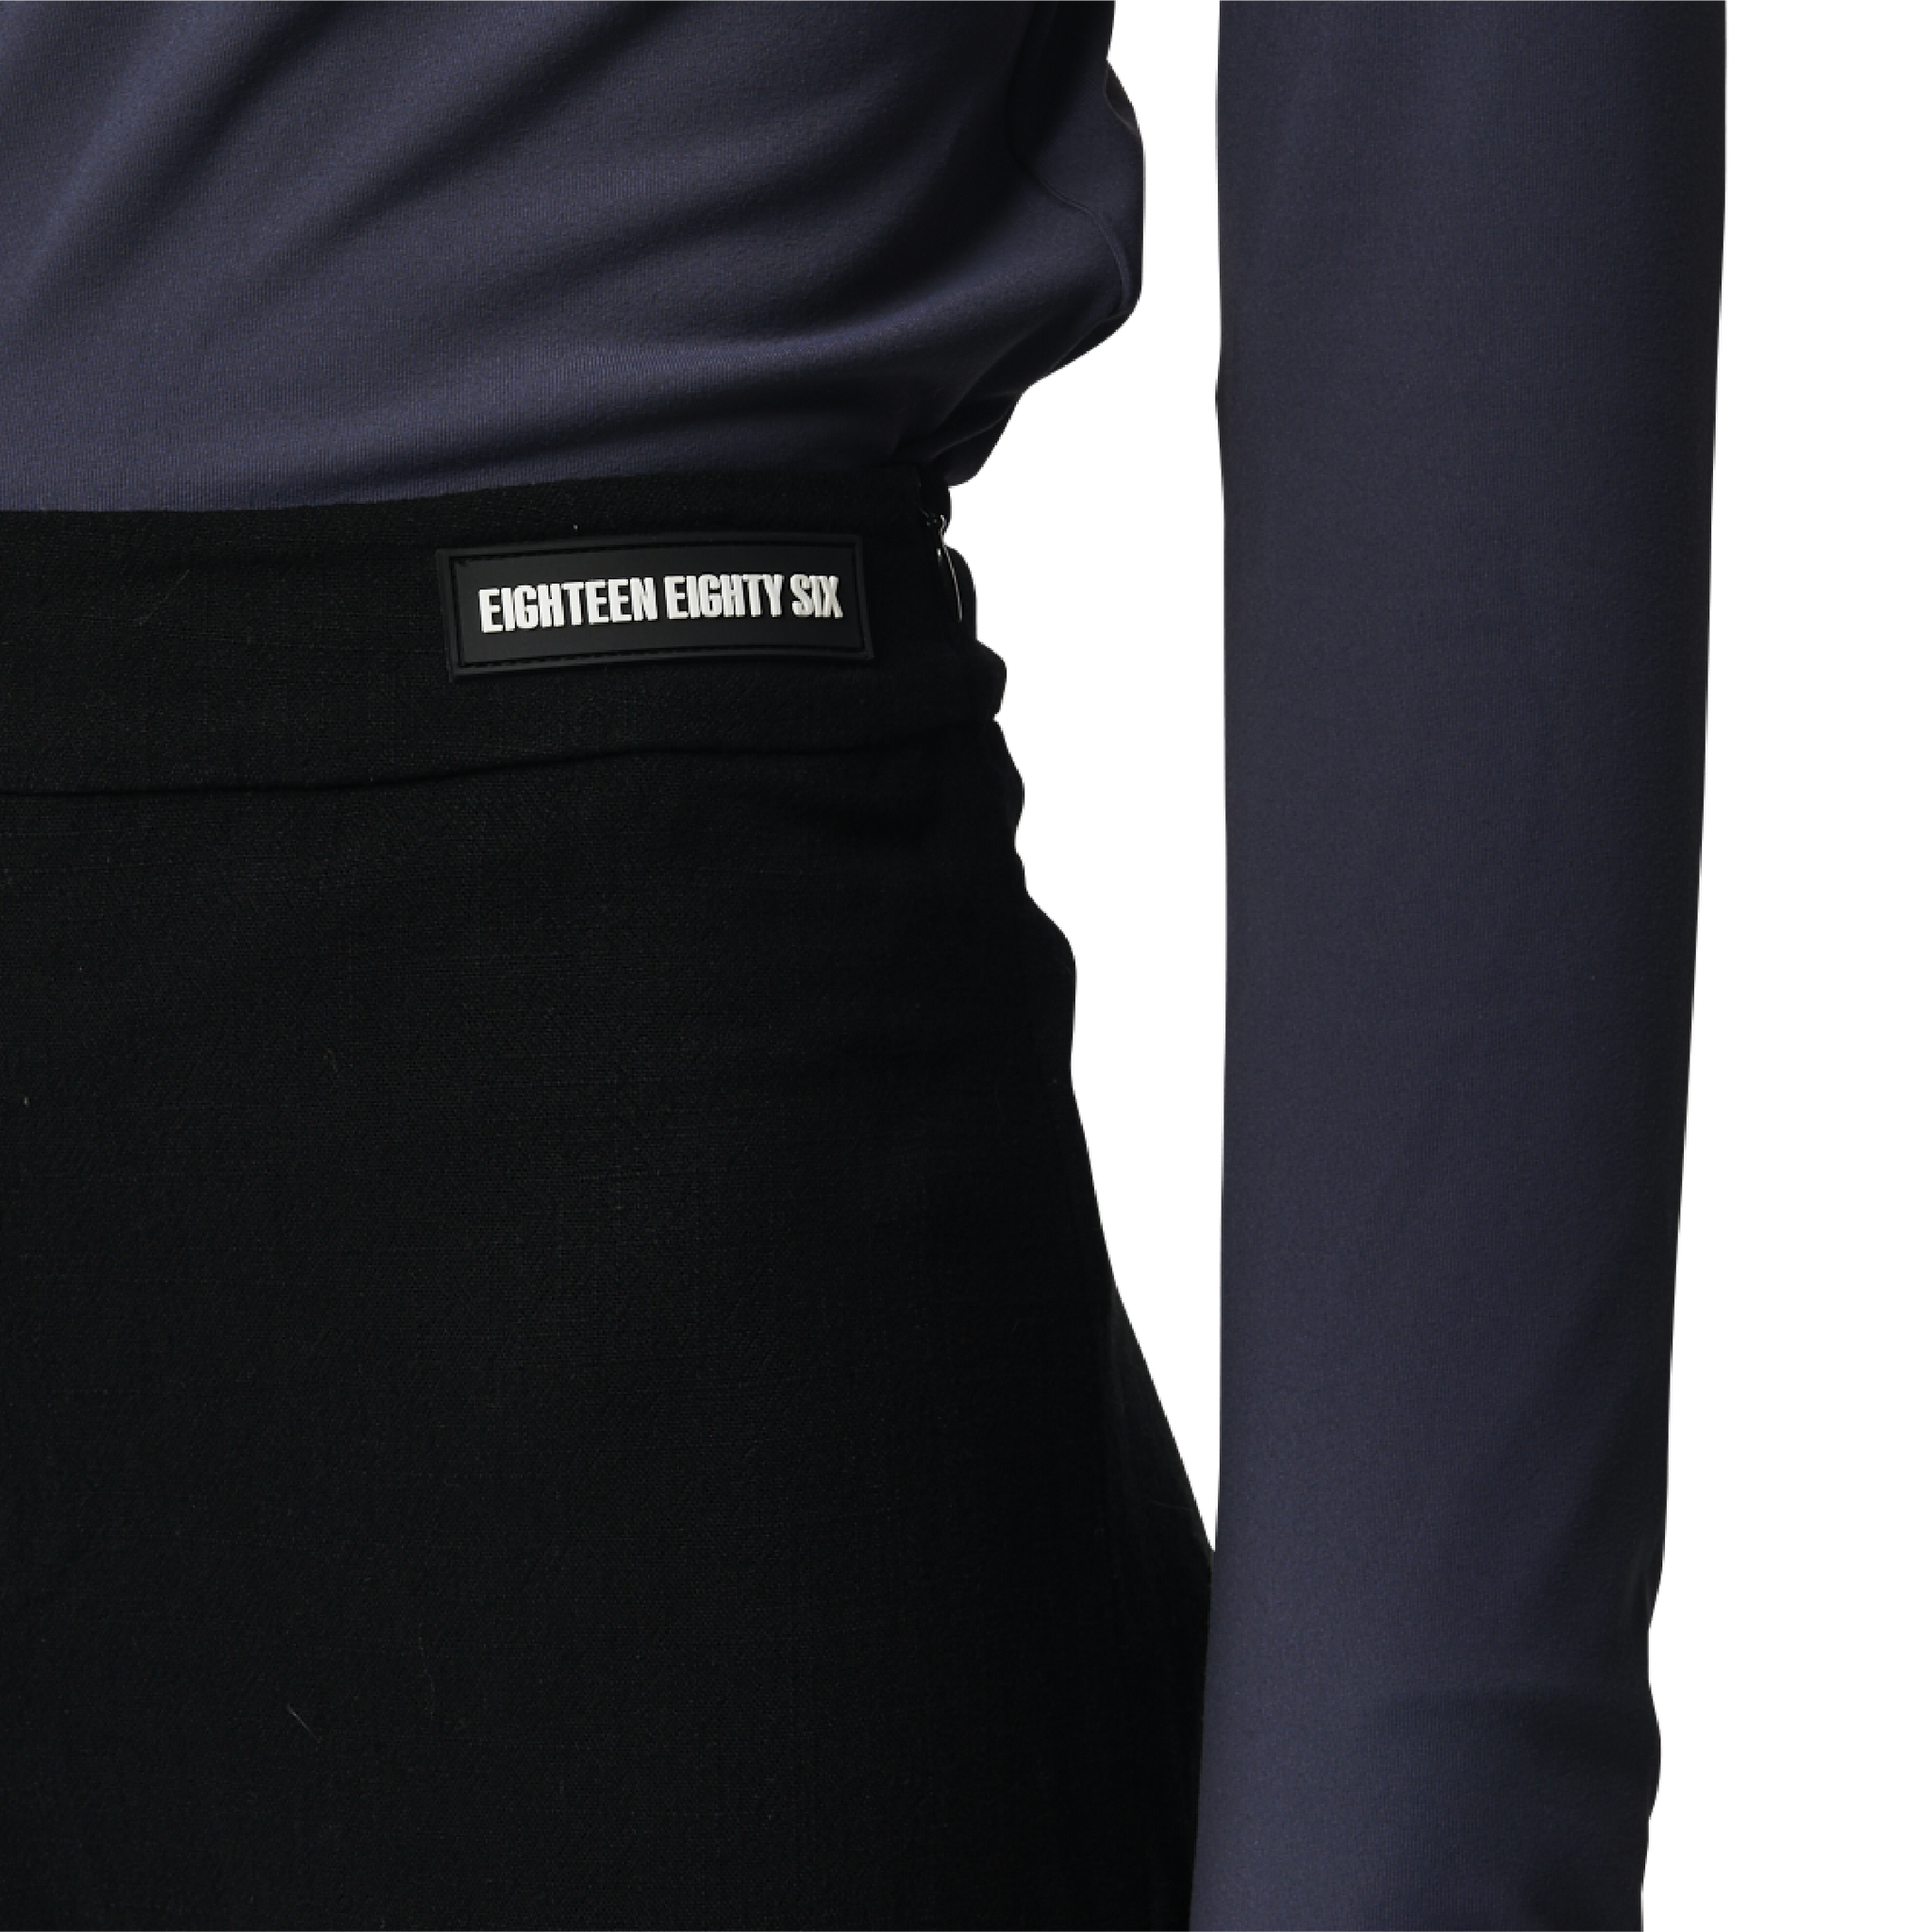 Classic fit charleston cut pants in black fabric featuring Eighteen Eighty-Six logo patch sewn at waist. High waist.